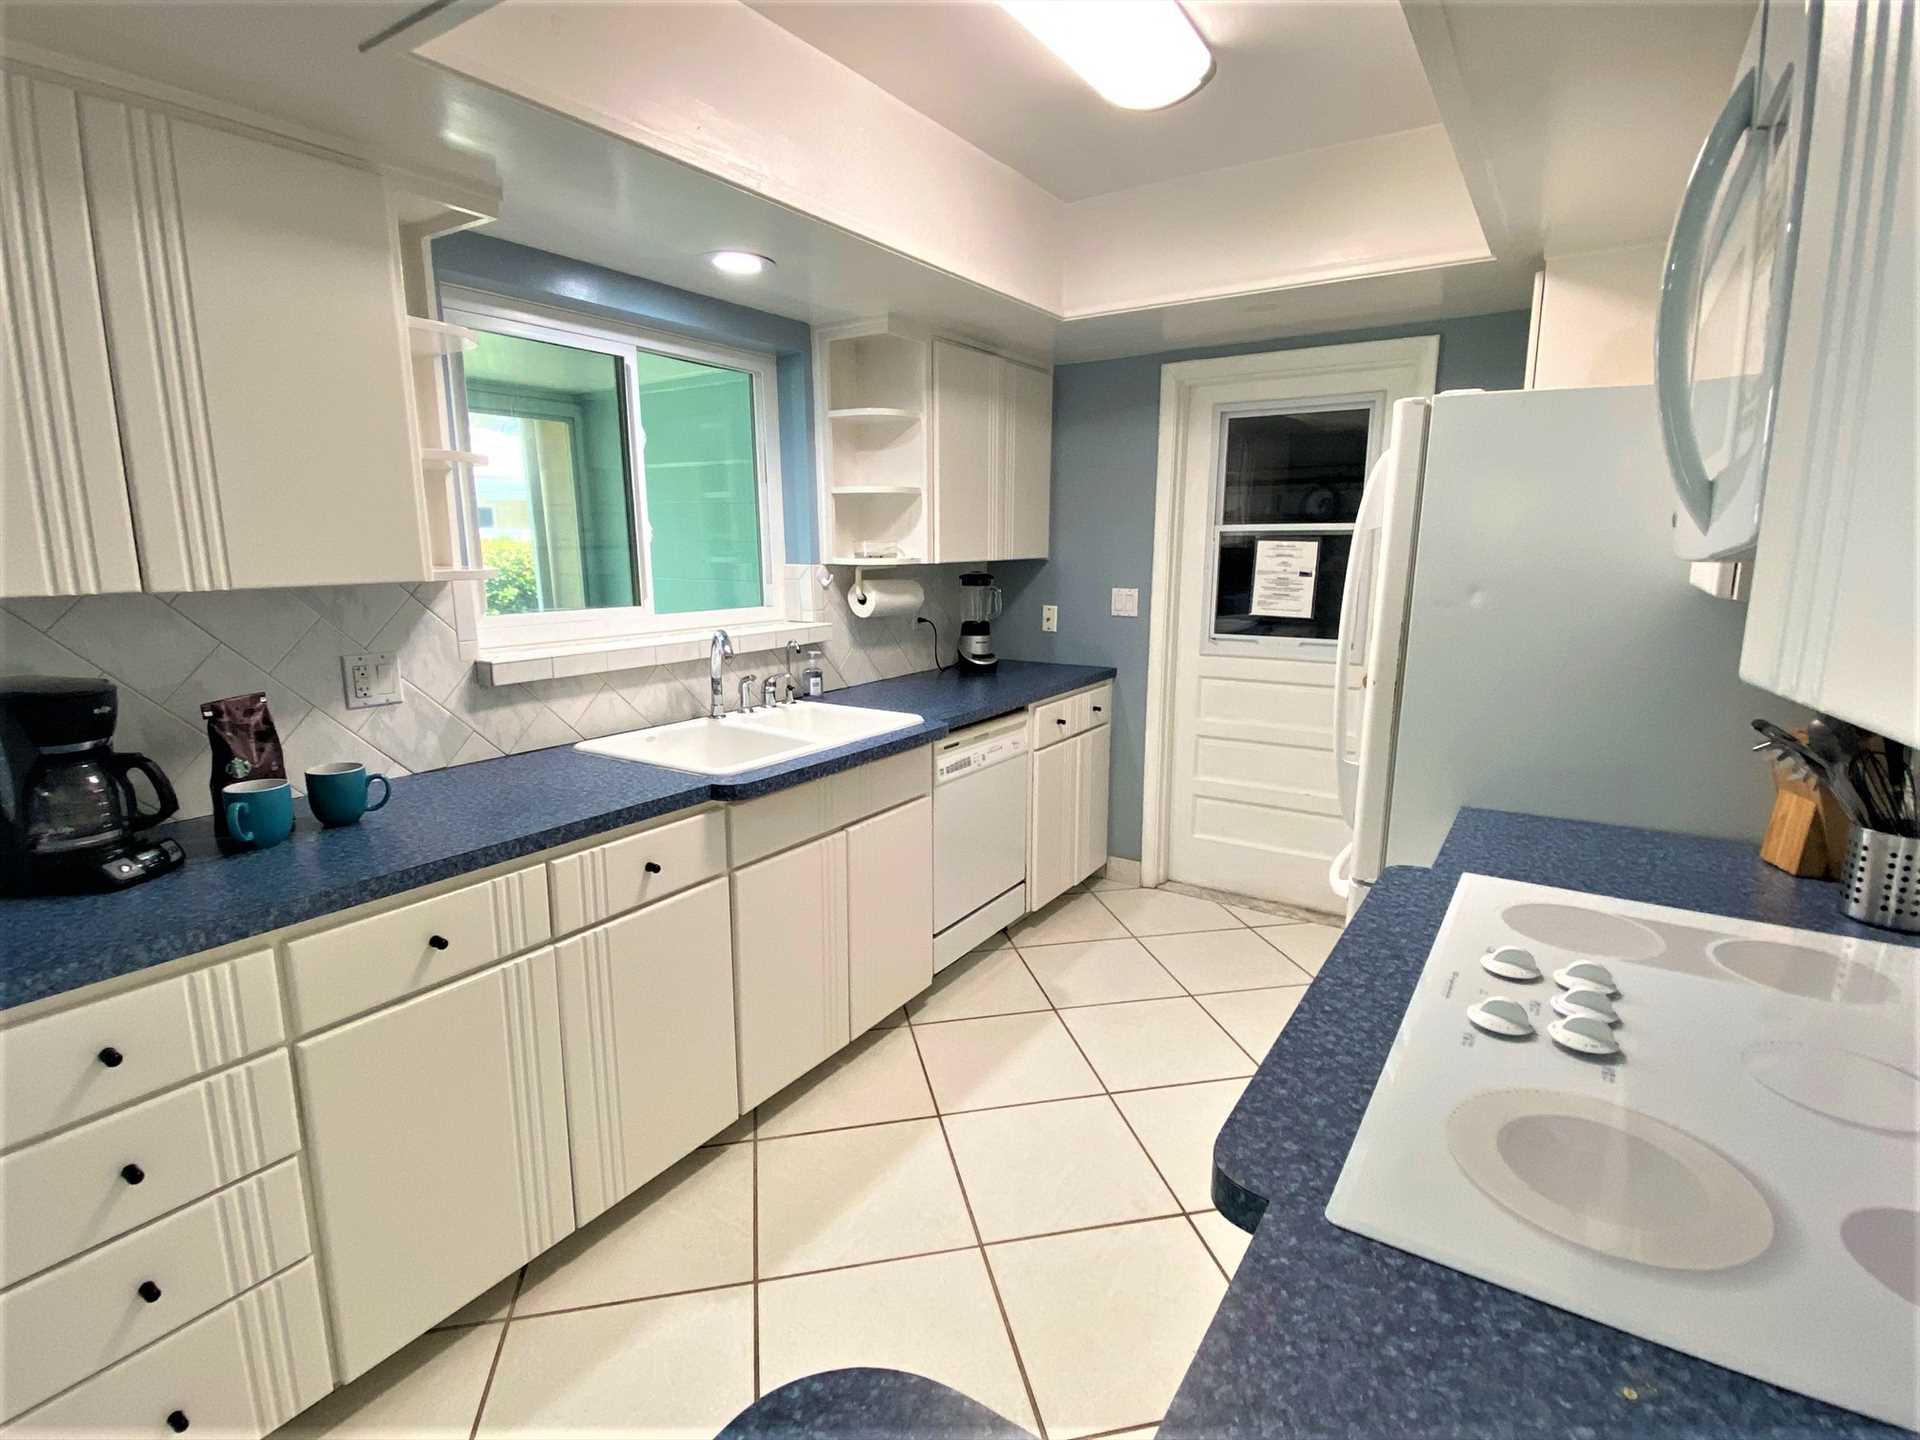 Fully equipped kitchen has all appliances, dishes, cookware 